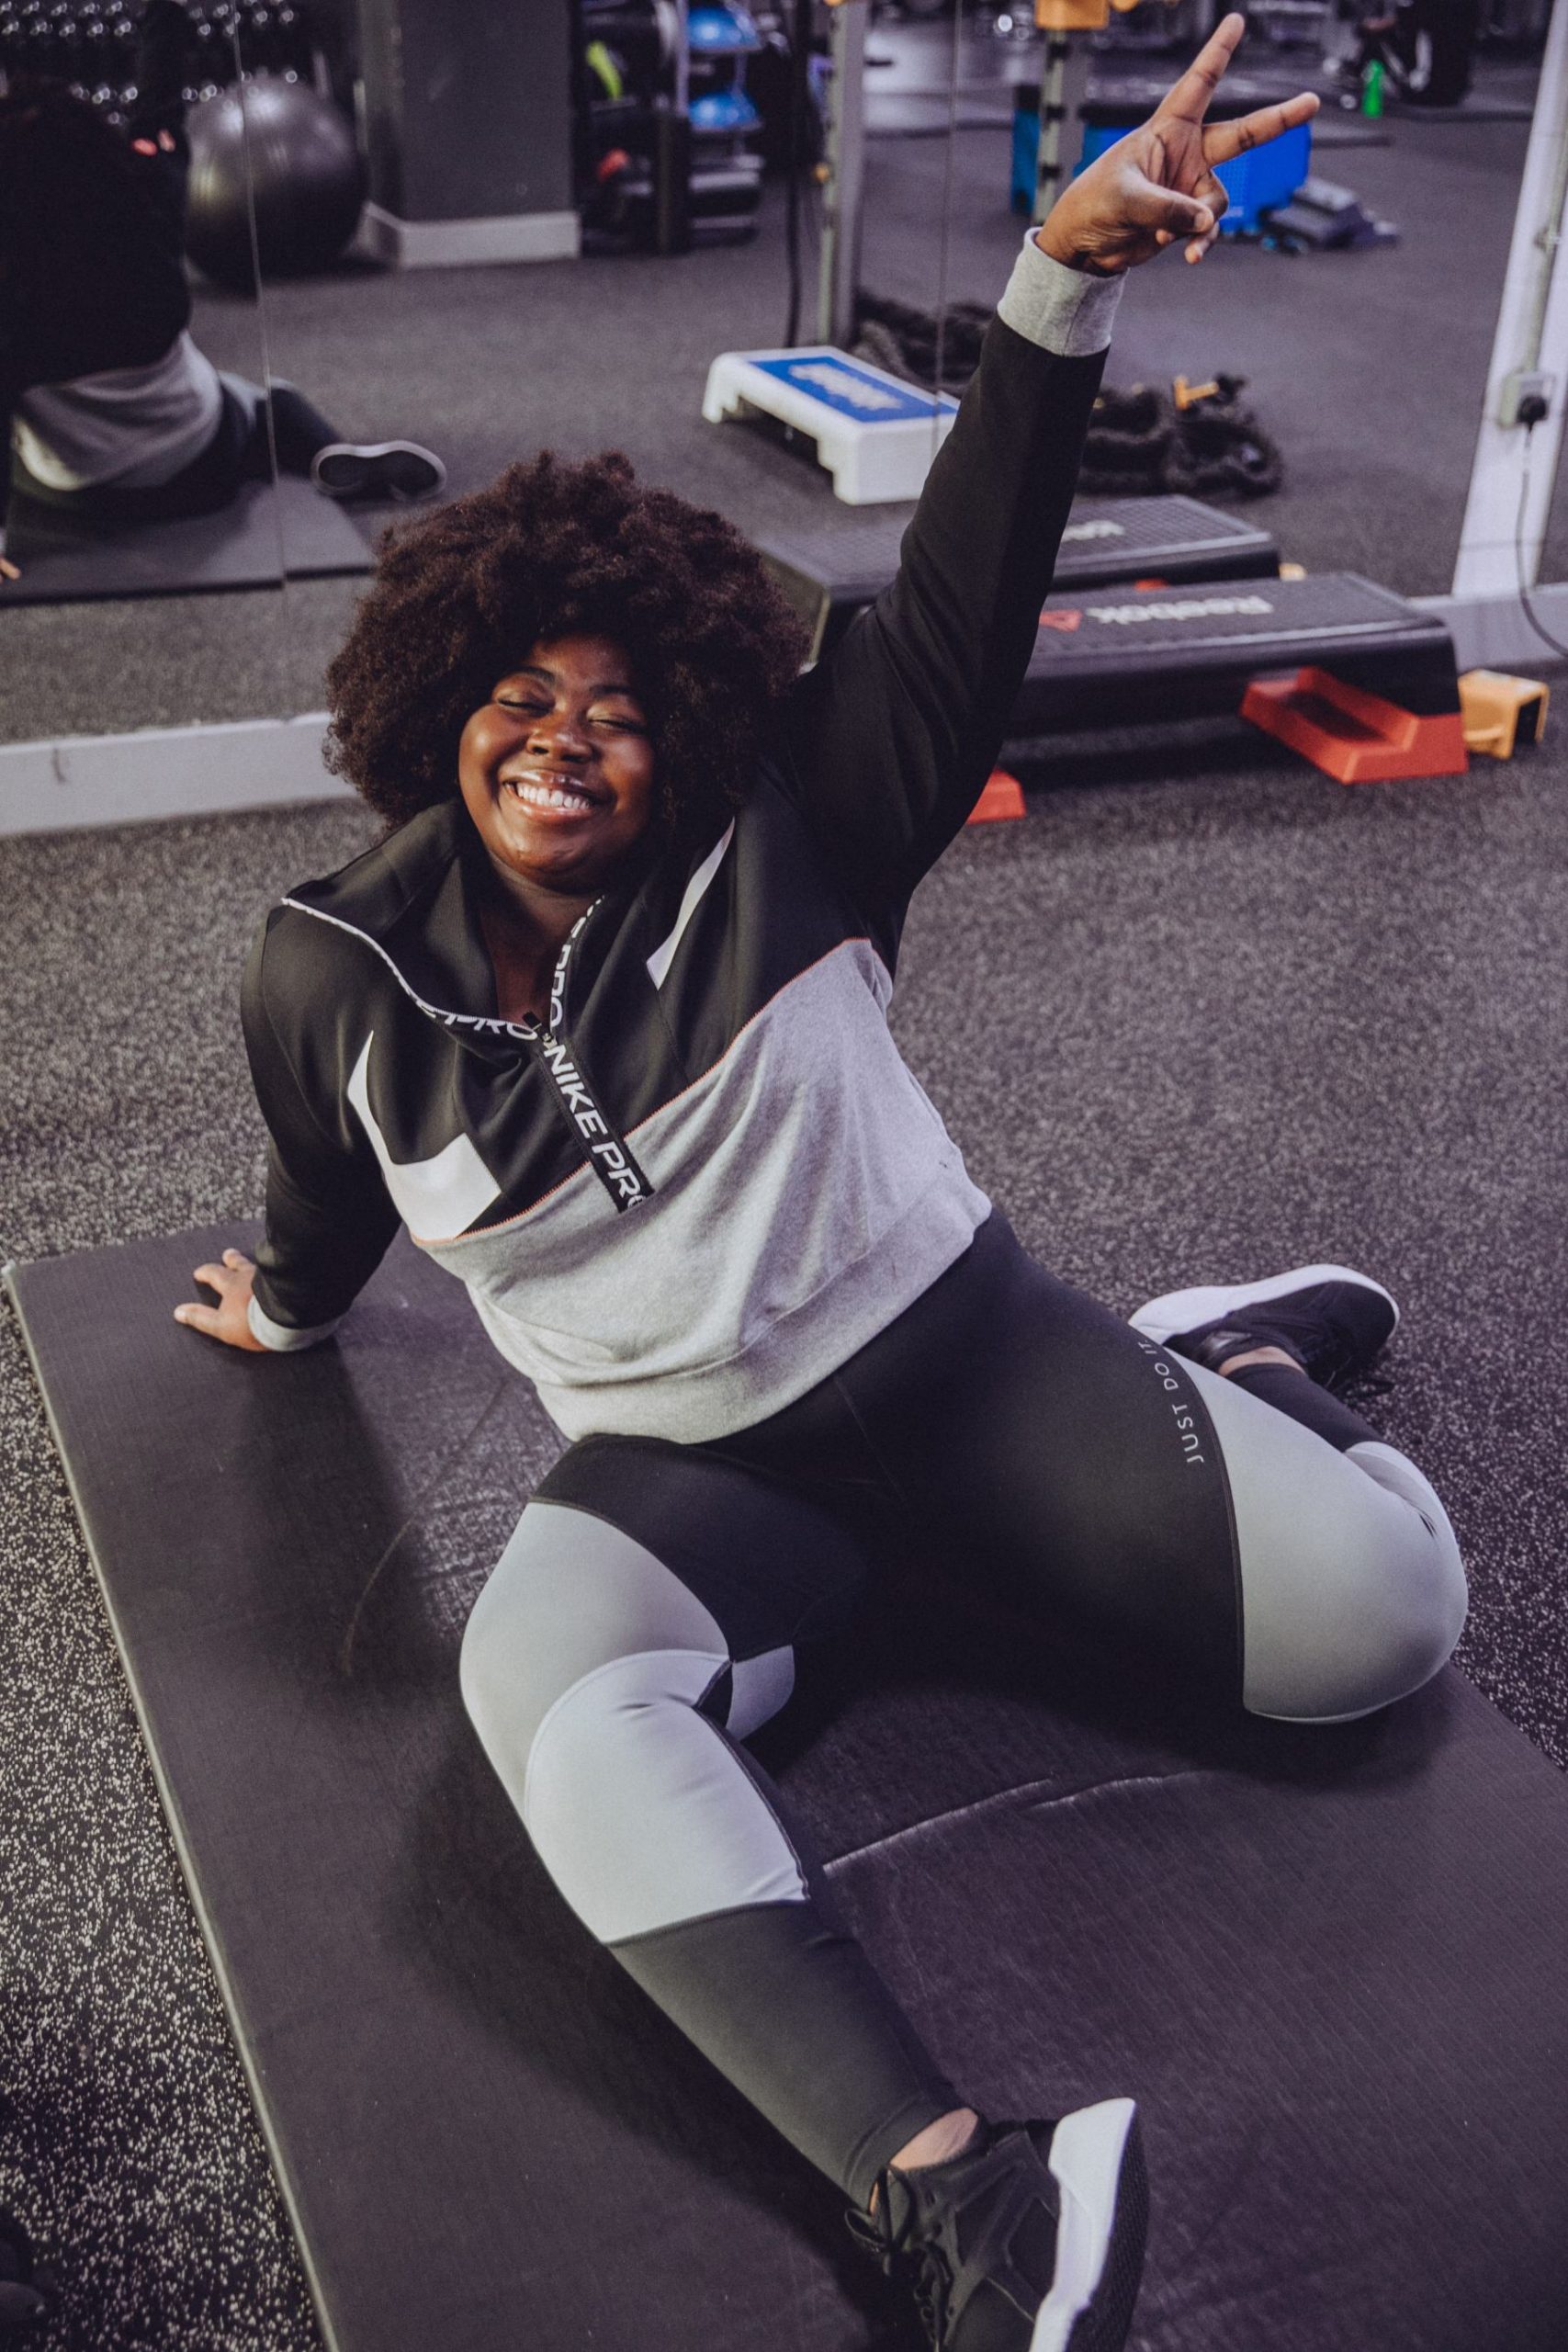 Finding The Balance As a Plus Size Woman in Fitness - Stephanie Yeboah